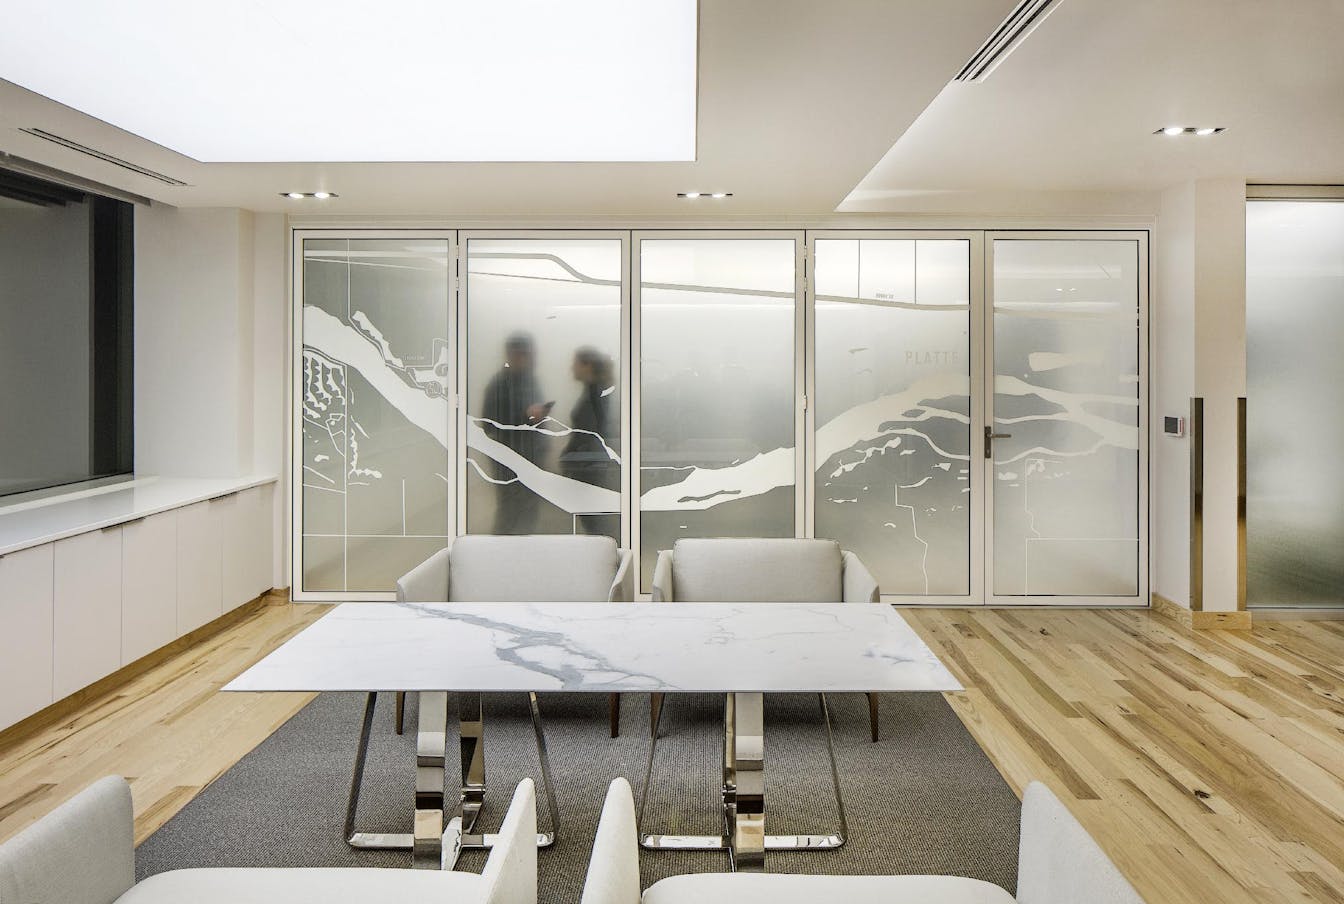 Law office with frosted glass walls